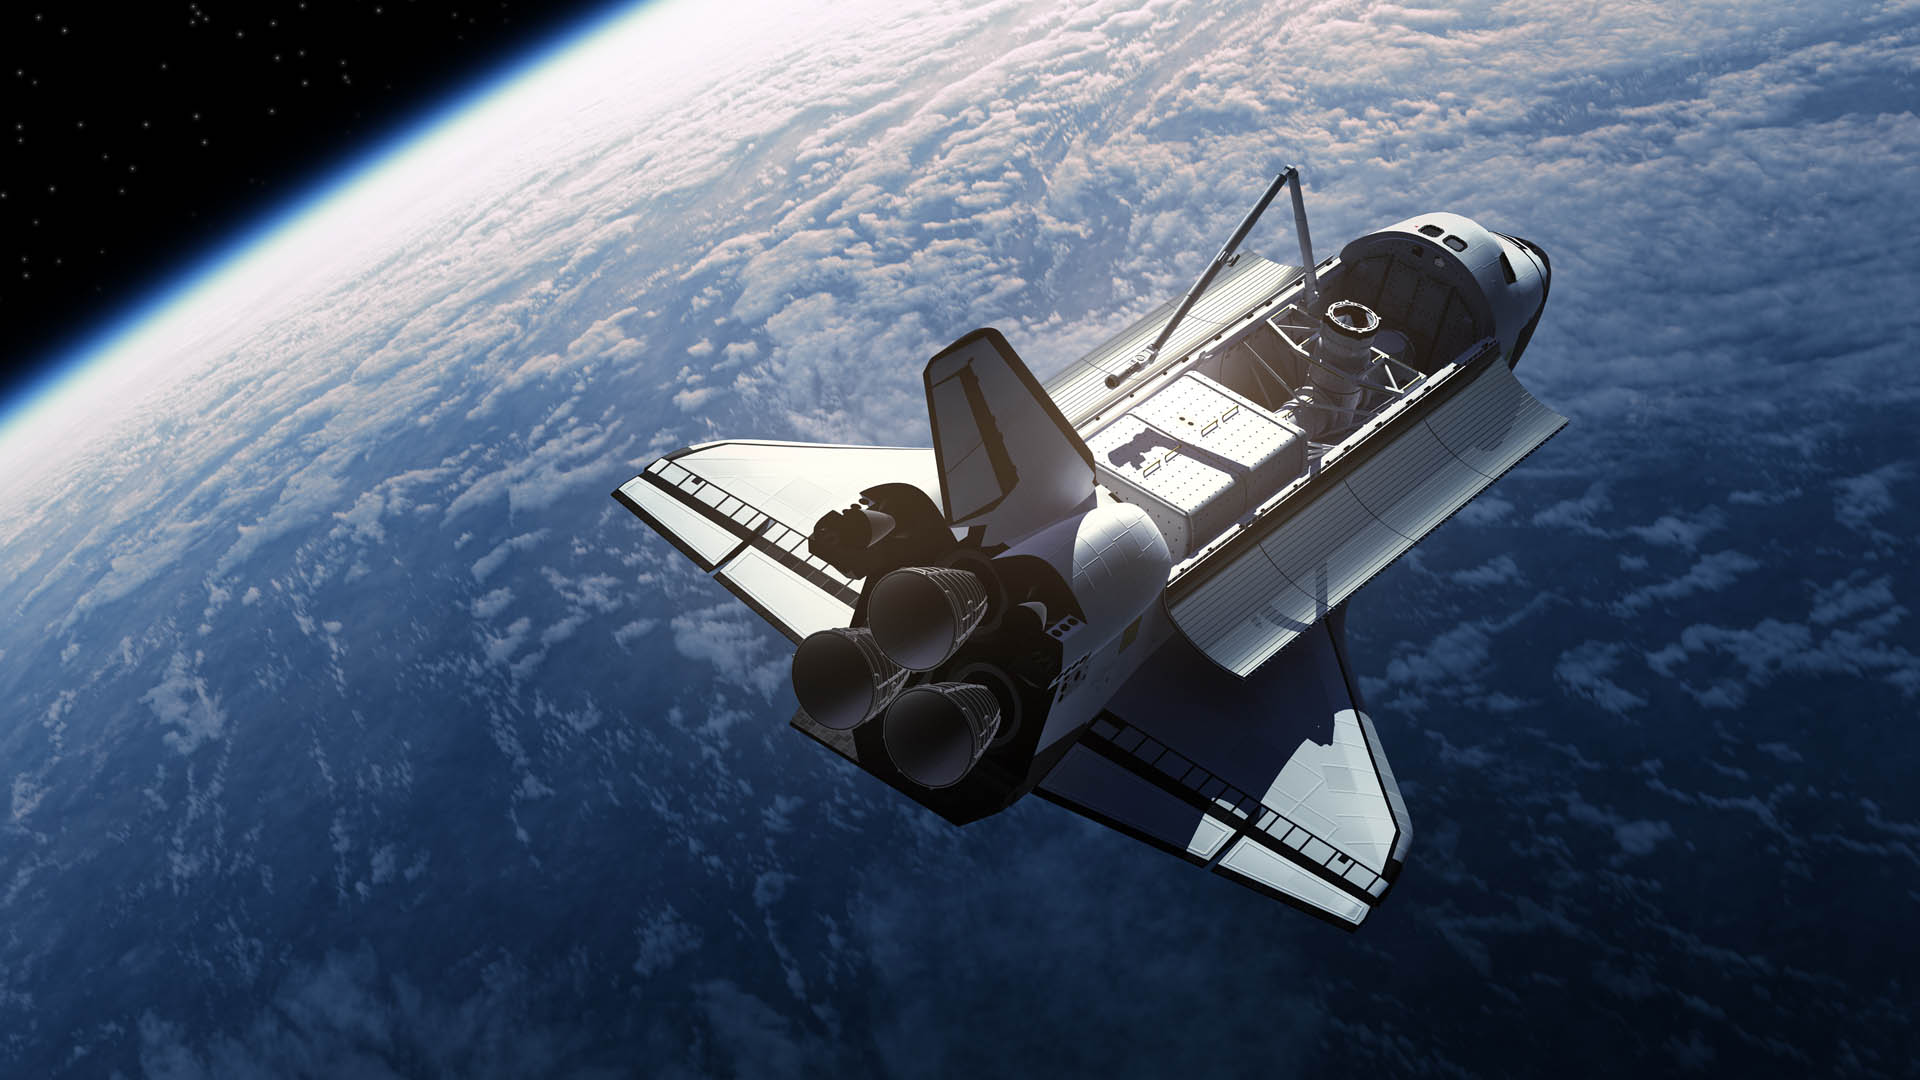 Space shuttle above the Earth